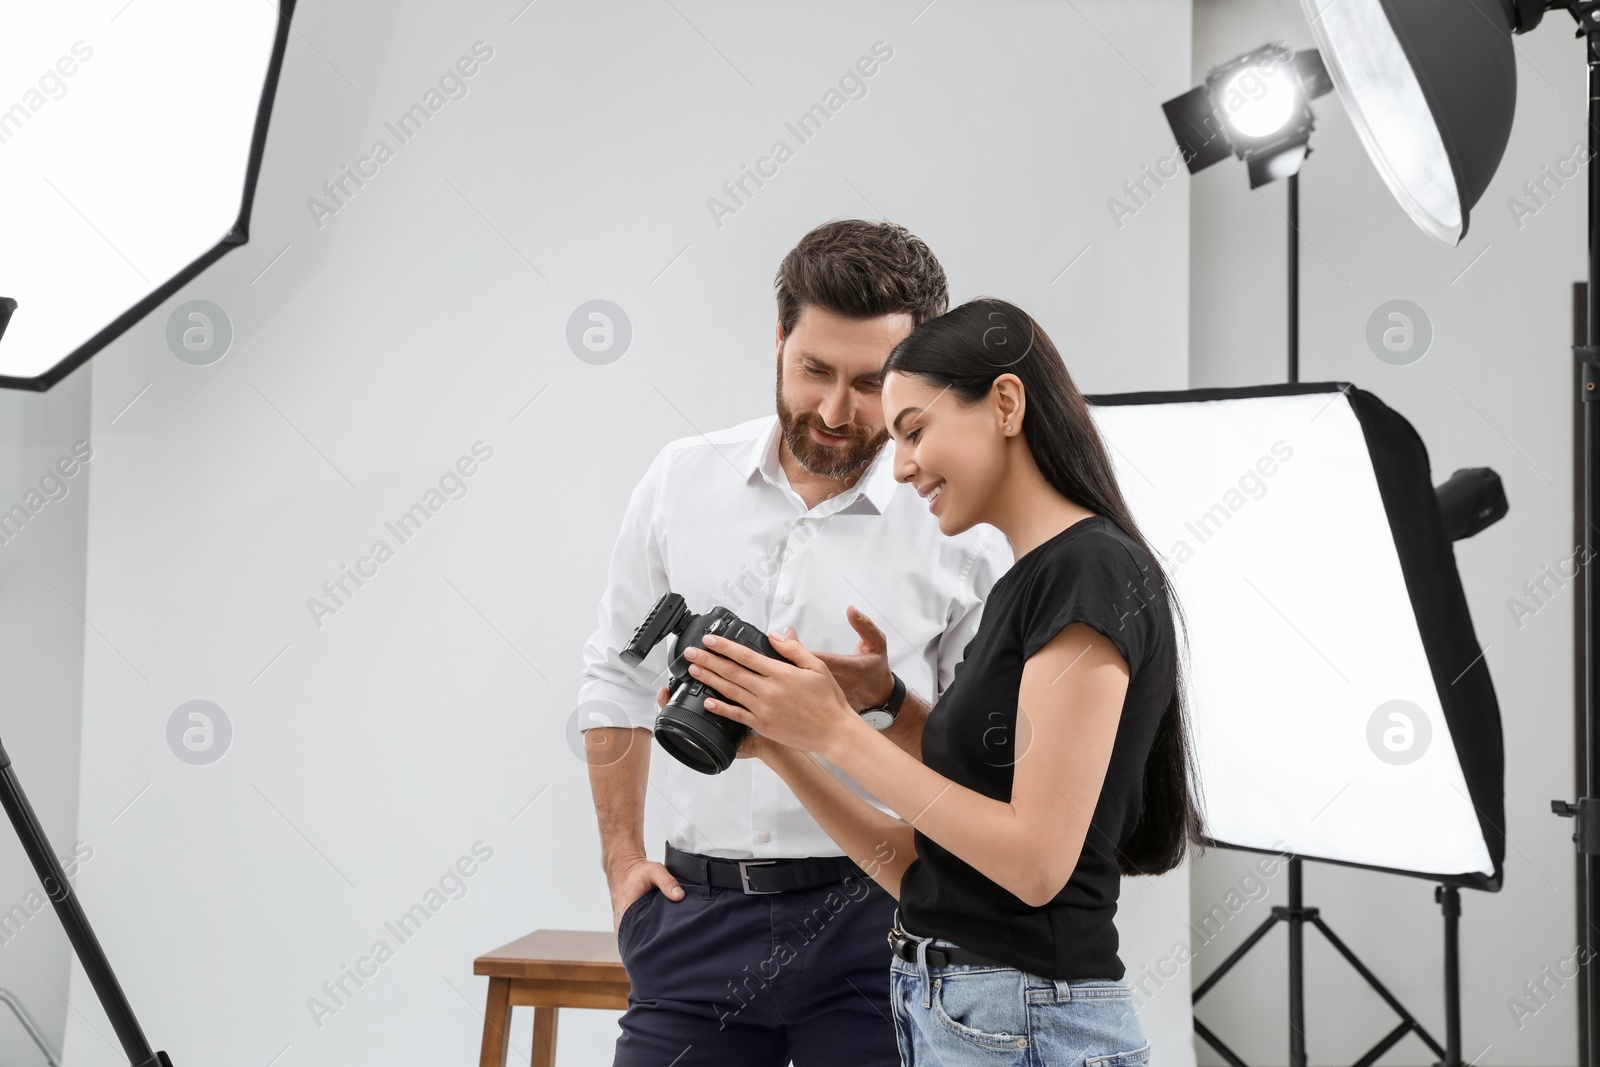 Photo of Professional photographer and model looking at pictures on camera in modern studio